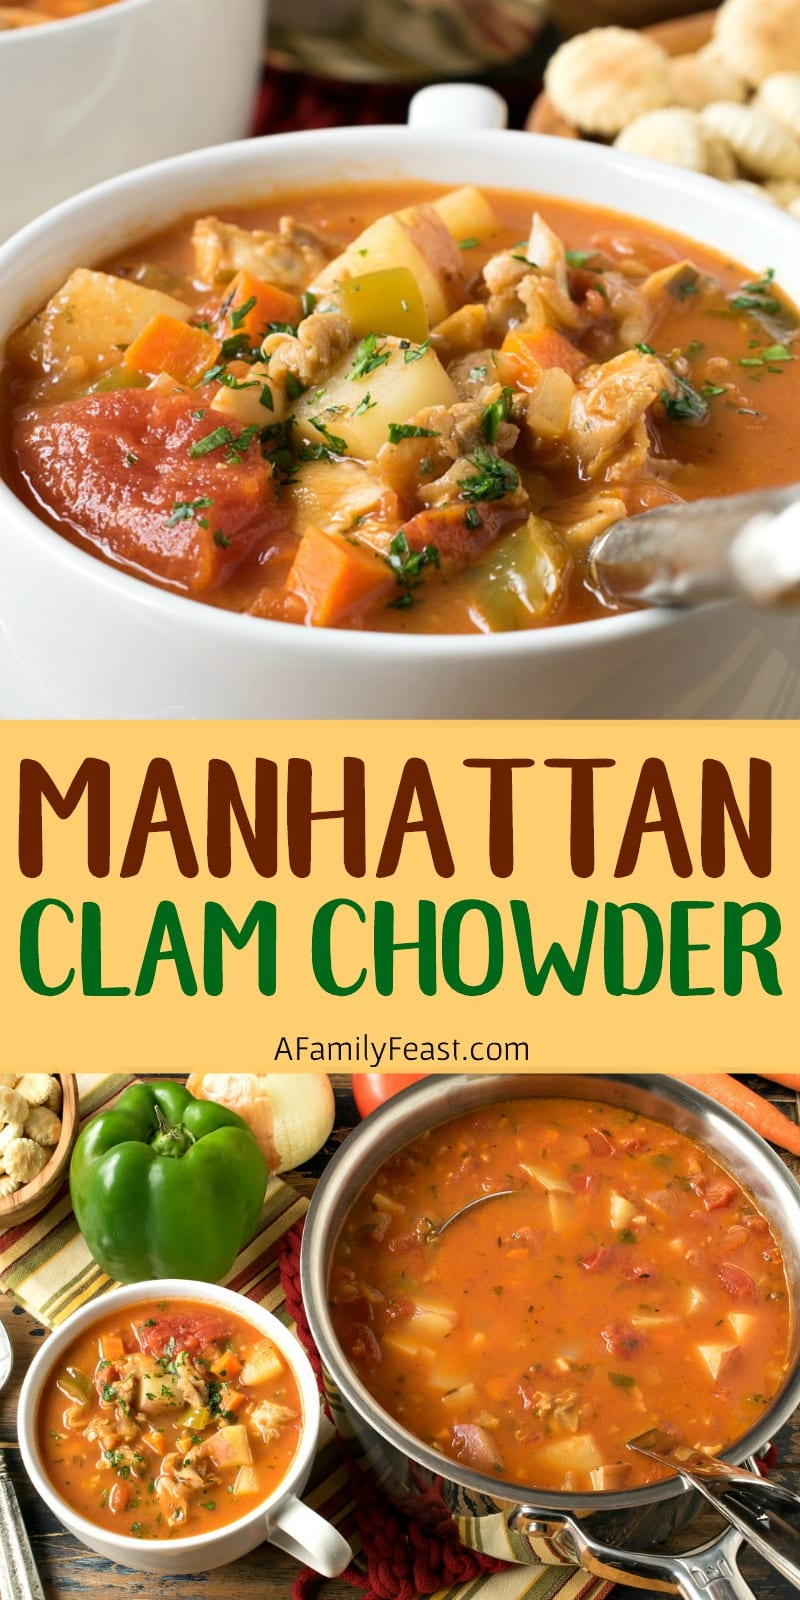 Manhattan Clam Chowder is a thick and flavorful tomato-based chowder loaded with chopped clams, potatoes, green bell peppers and other vegetables.